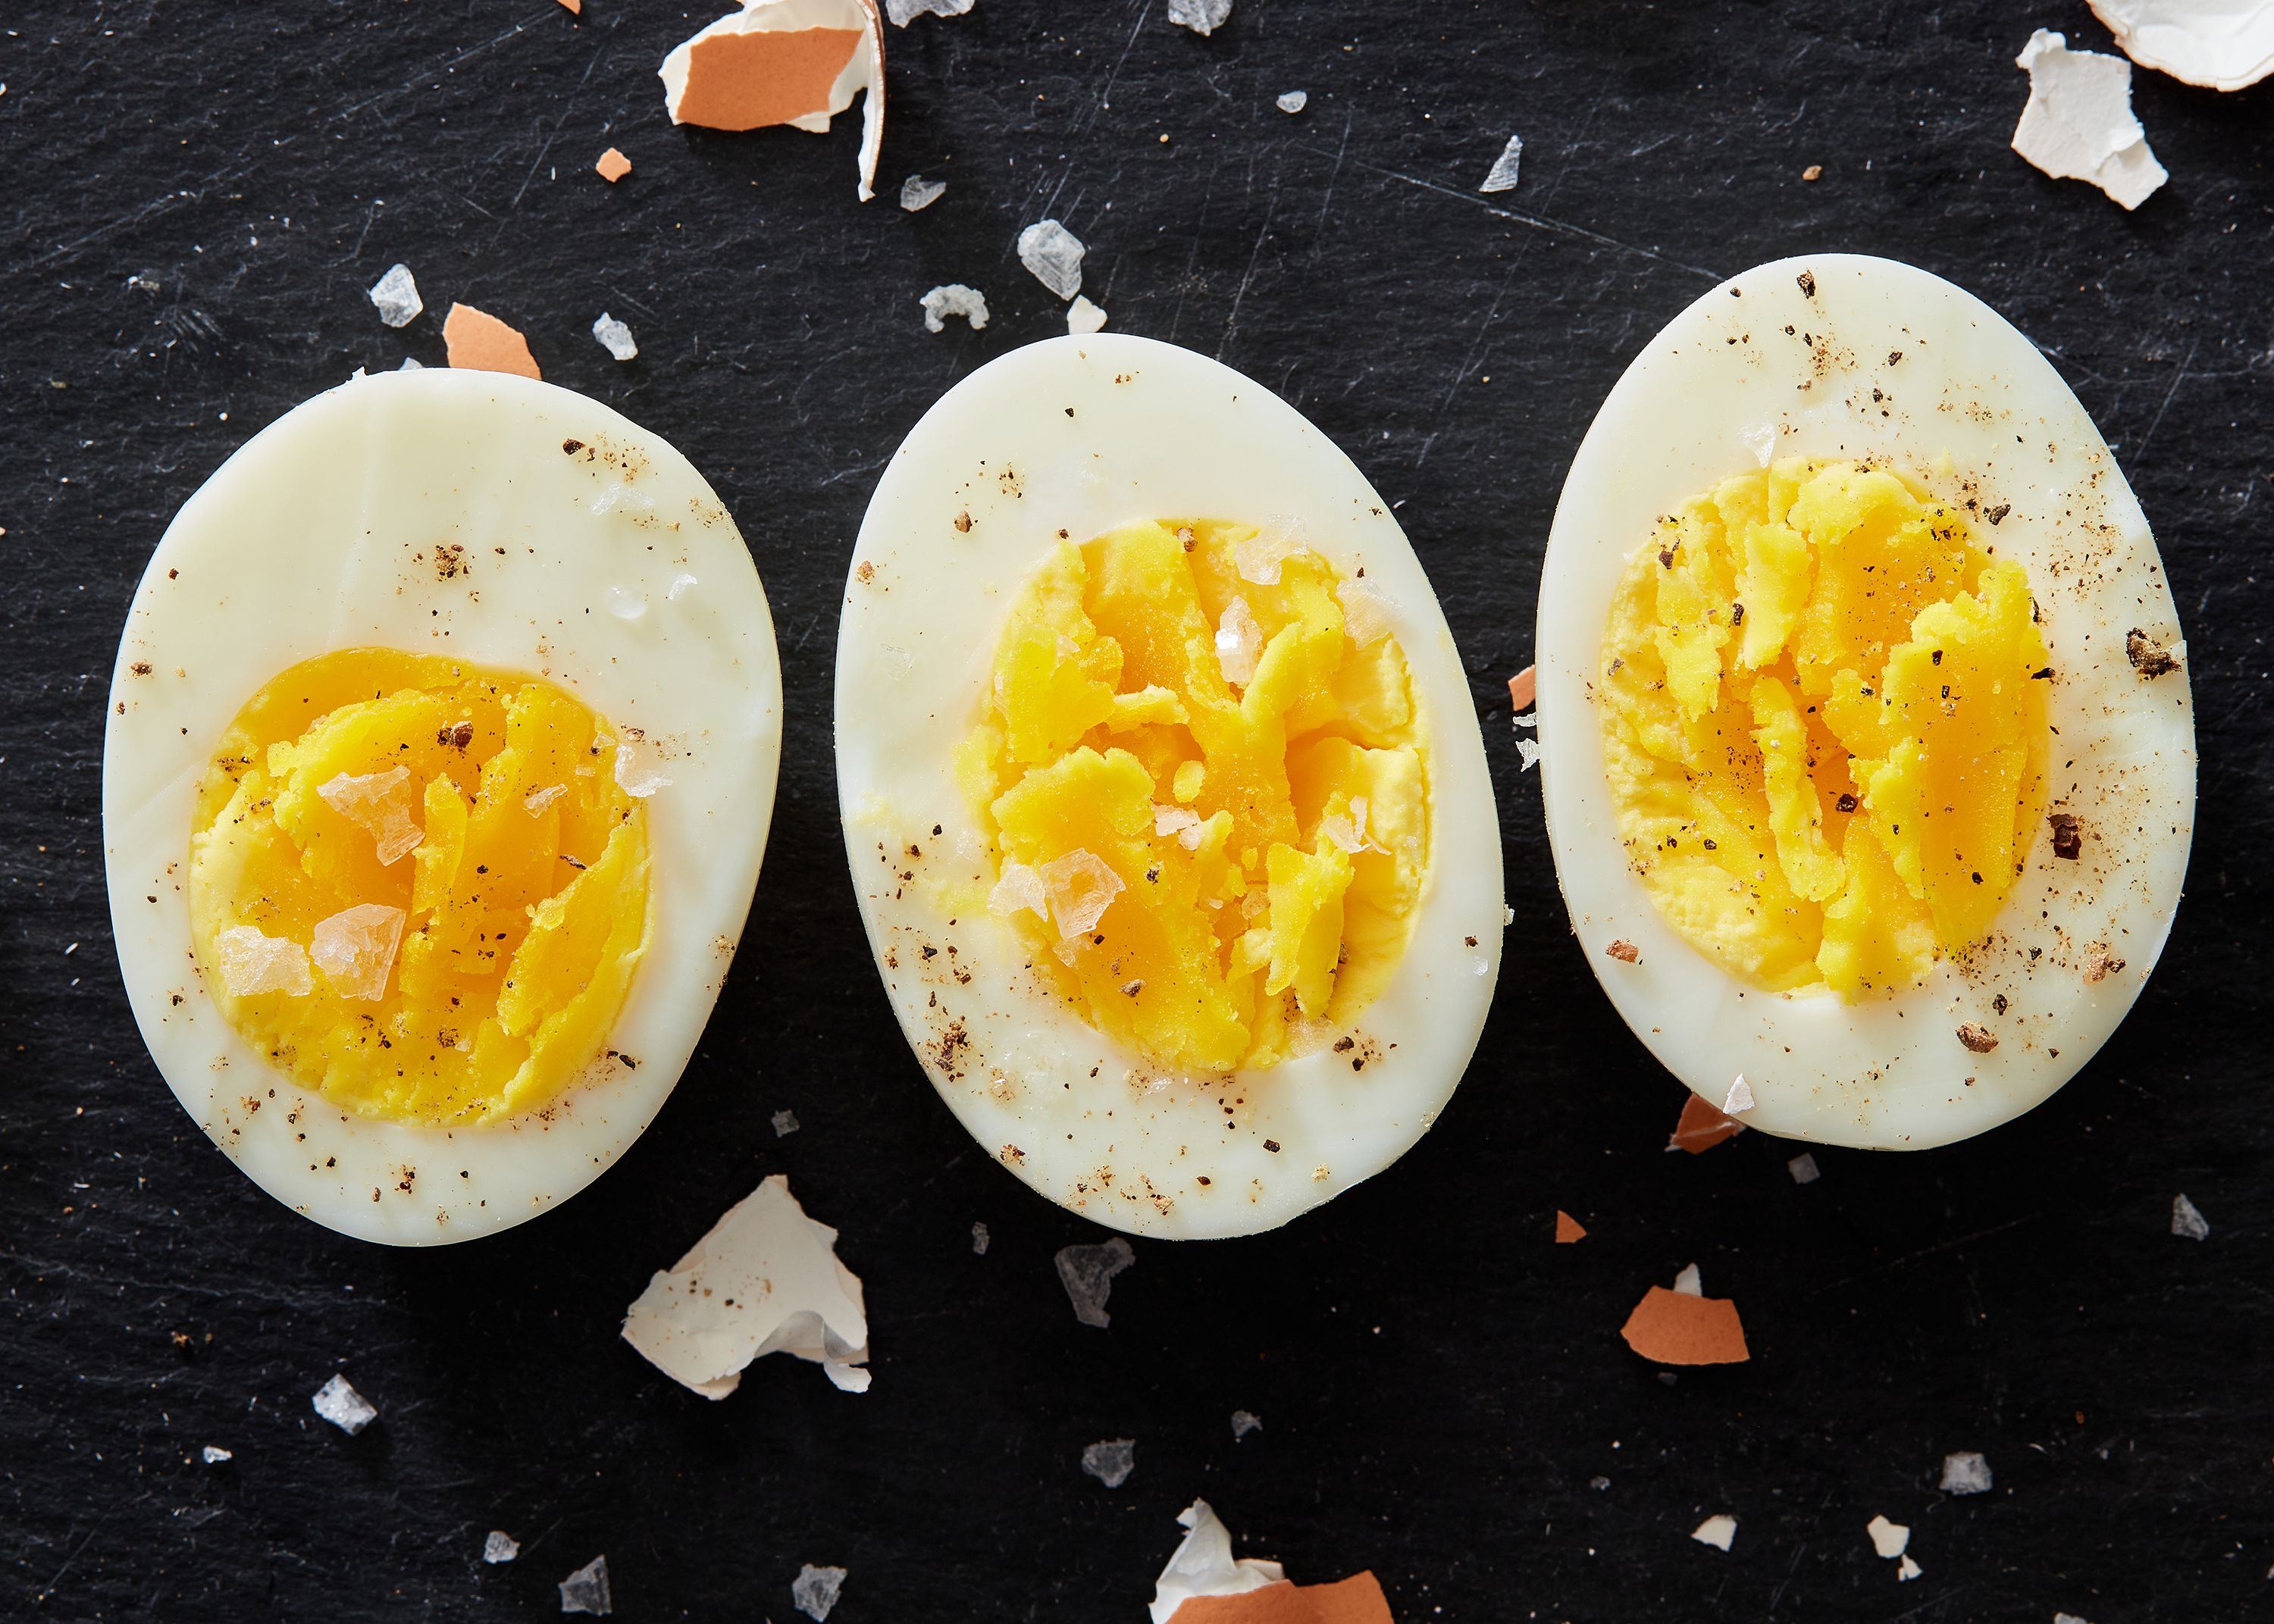 Air Fryer Eggs 7 Ways (Recipes, Tools, How-To)